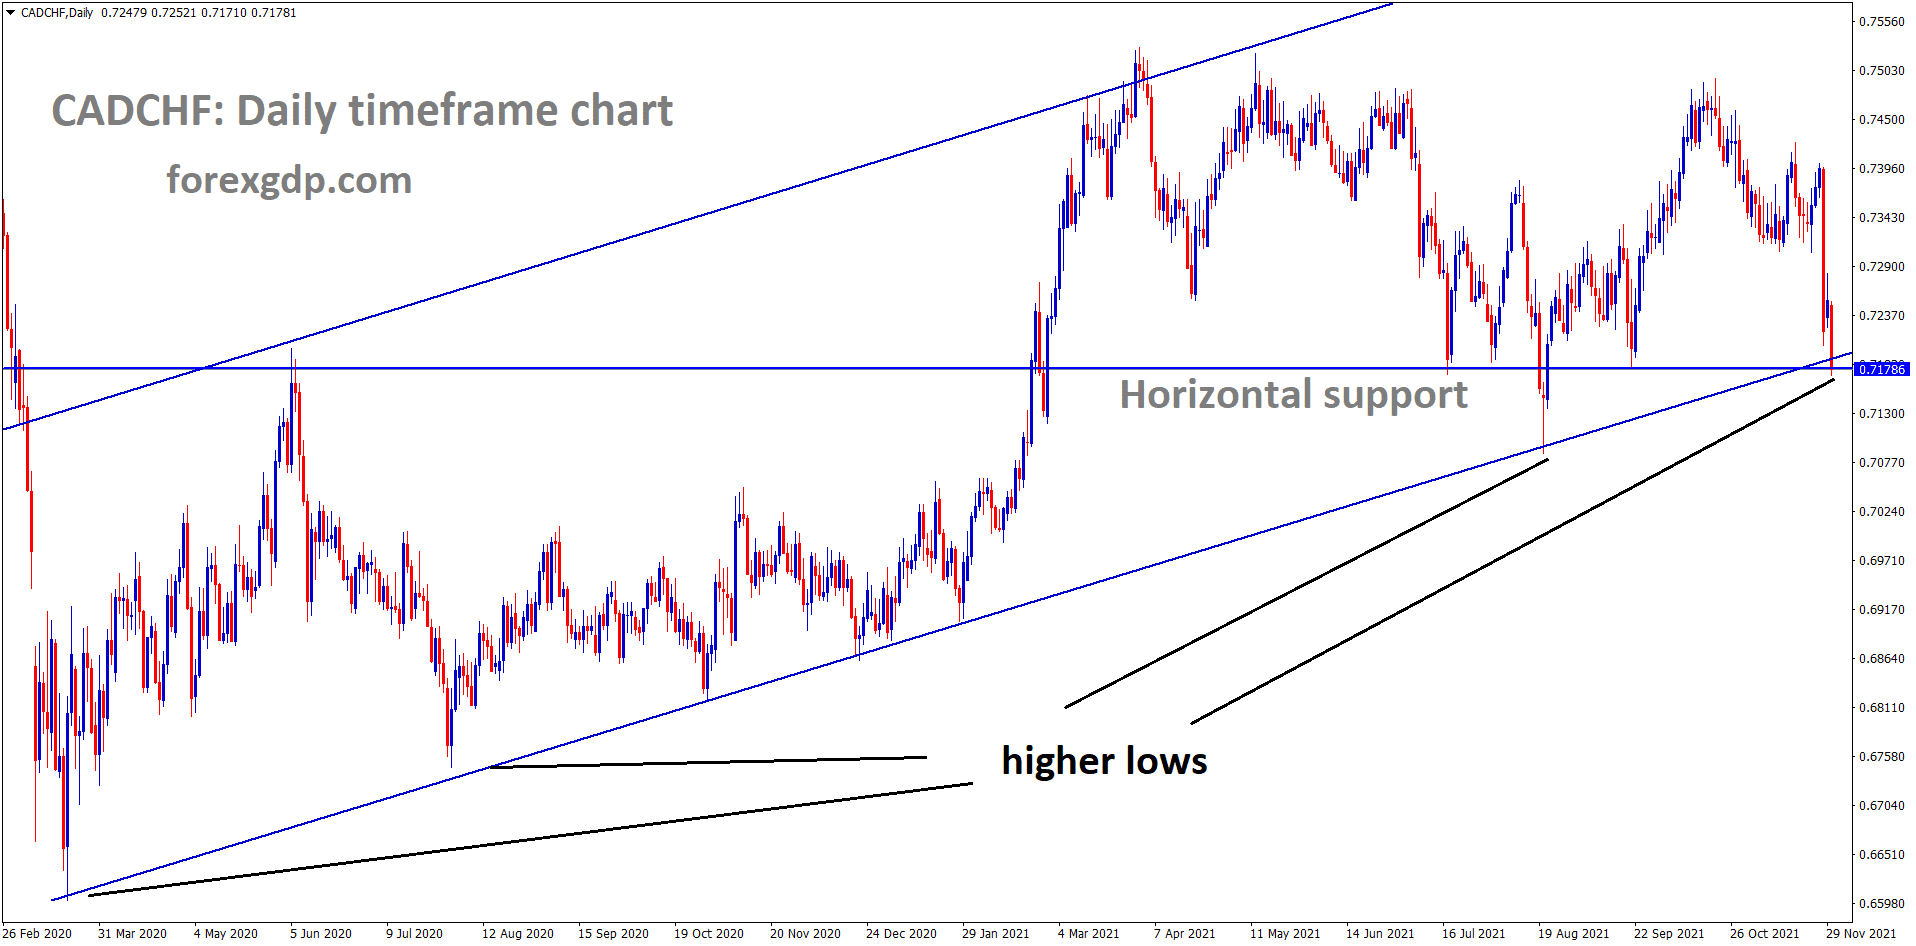 CADCHF is moving in an Ascending channel and the market reached the higher low area of the channel and horizontal support area.